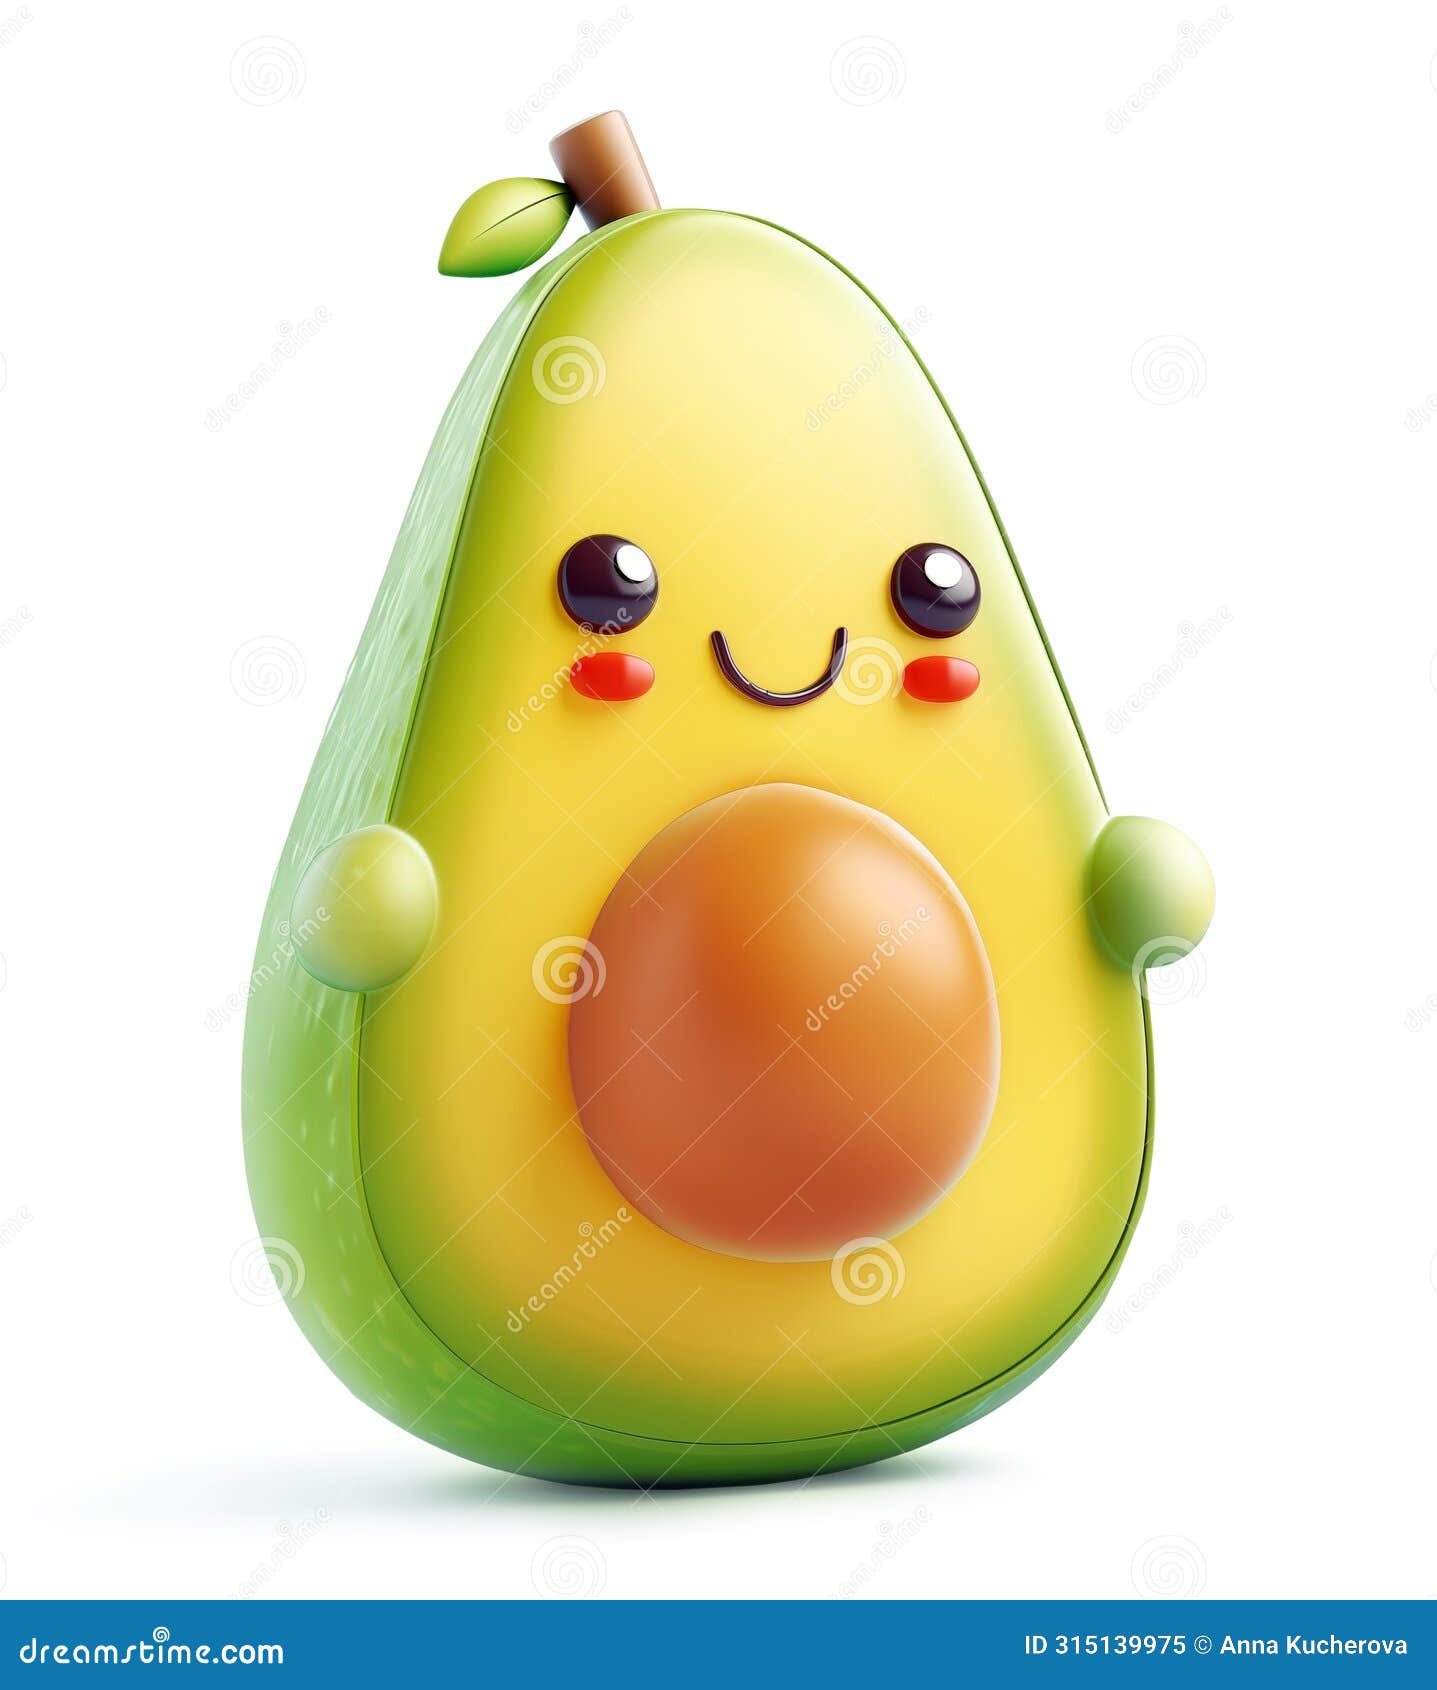 charming avocado character with a sweet smile